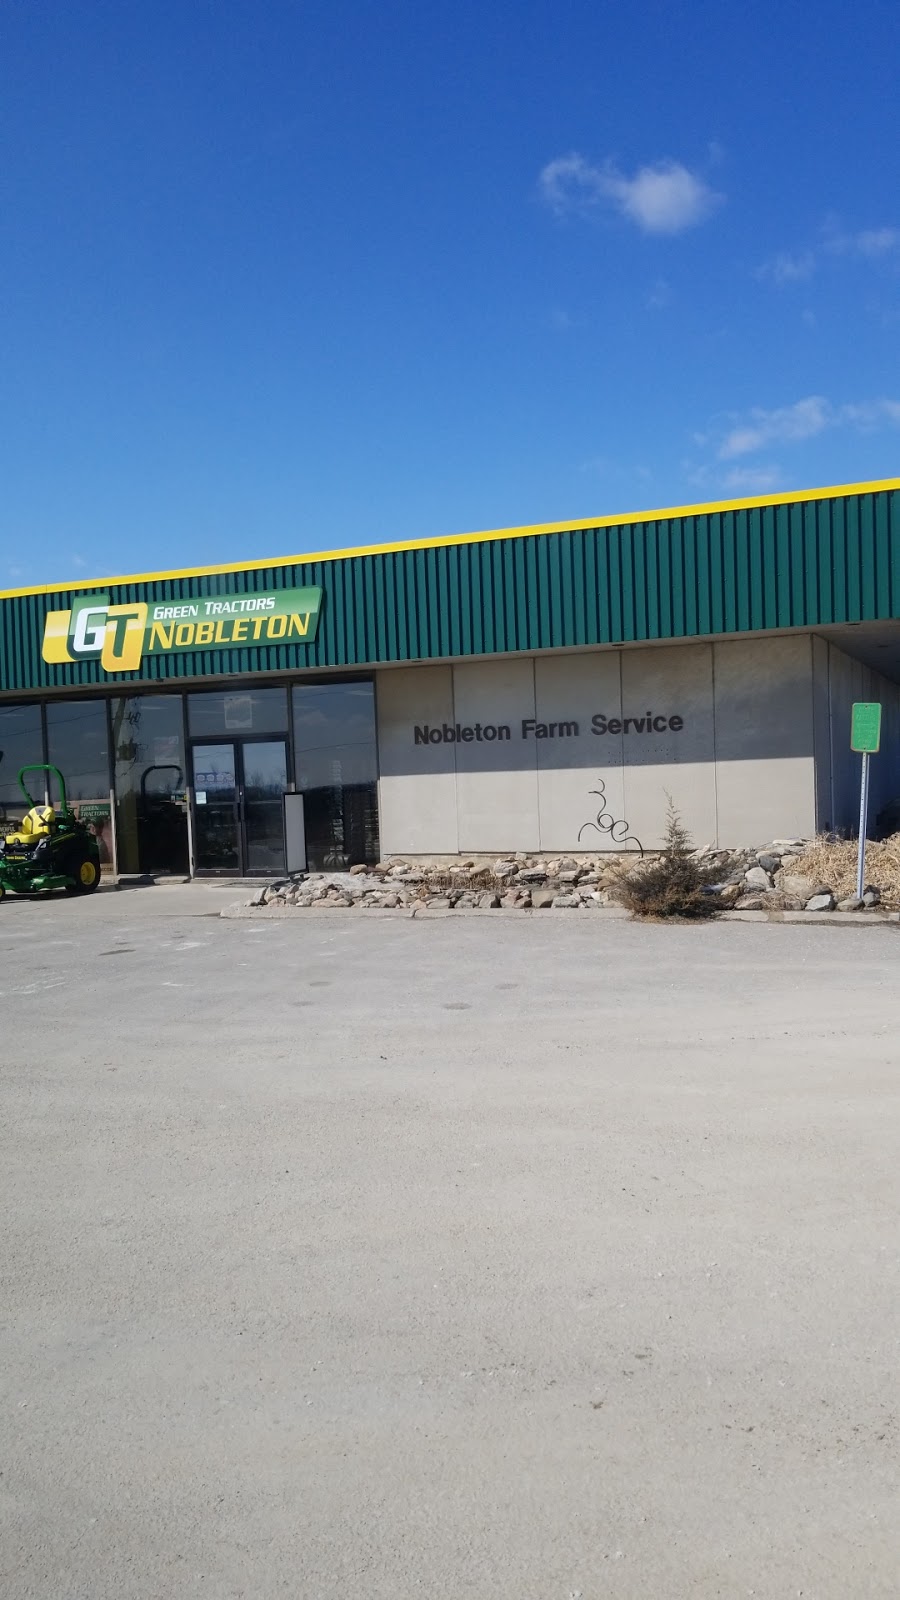 Green Tractors | 6770 King Rd, Nobleton, ON L0G 1N0, Canada | Phone: (905) 859-0581